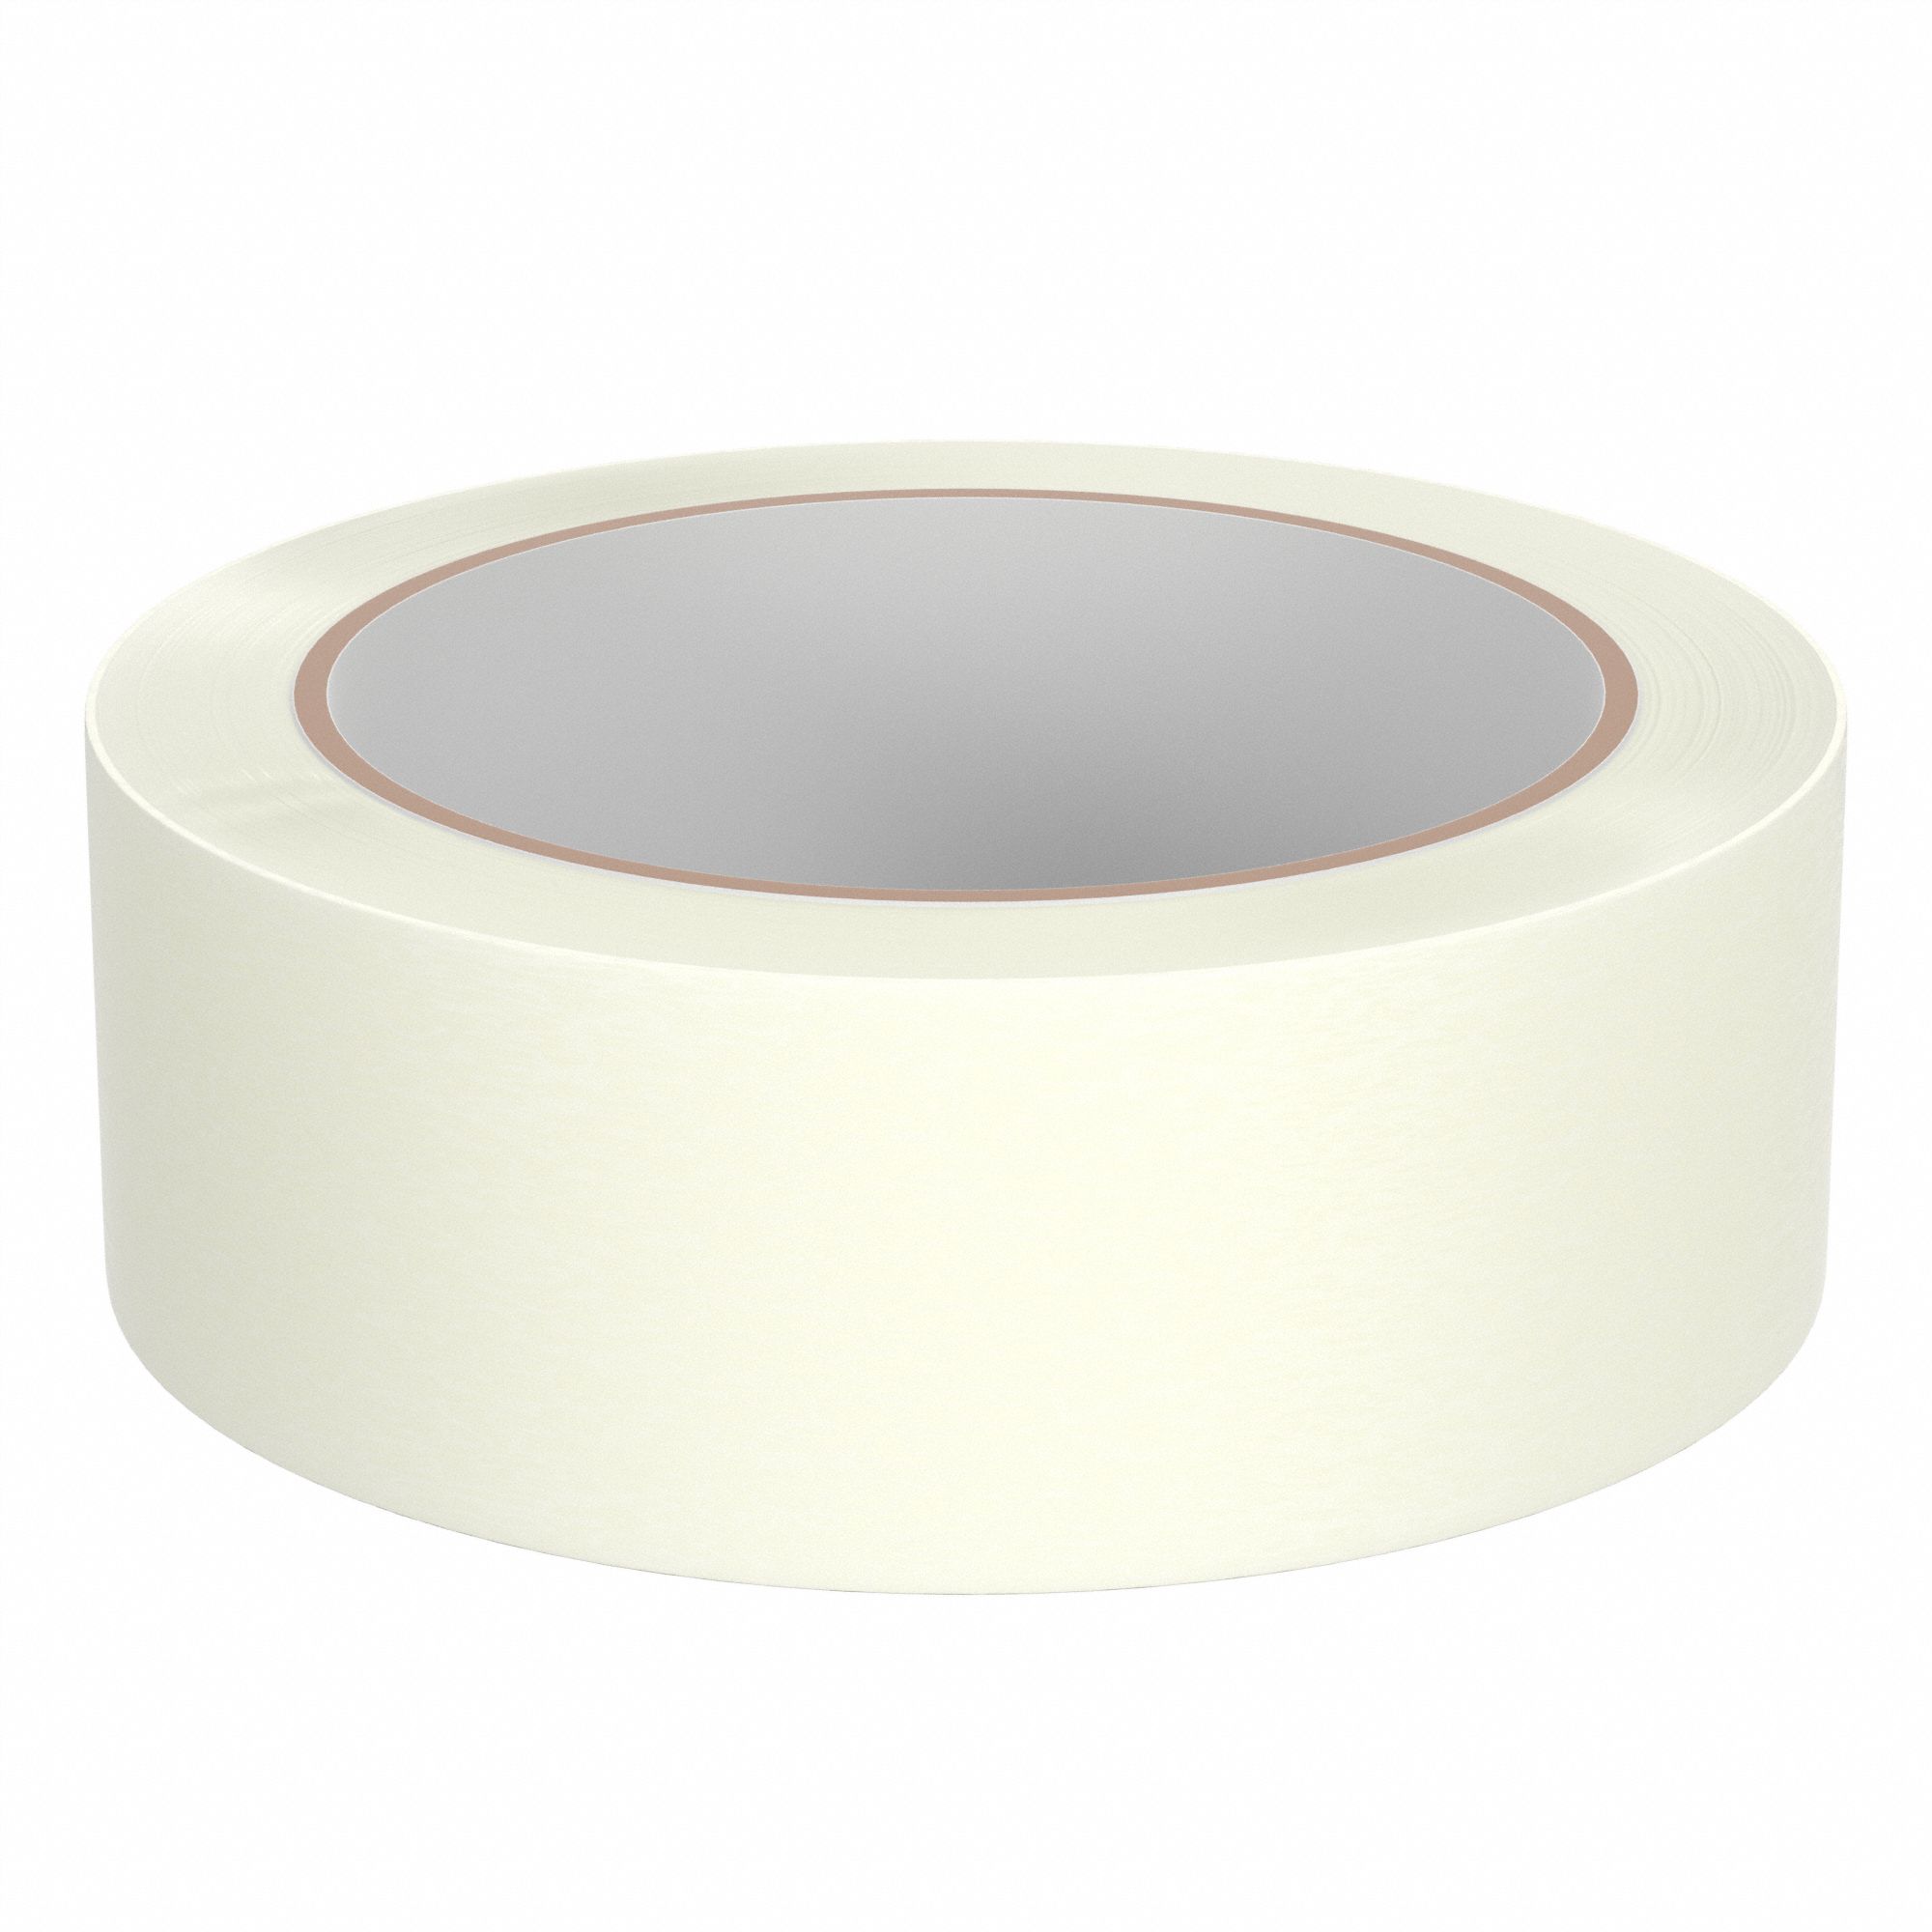 SCOTCH, 2.5 mil Tape Thick, 2 in x 55 yd, Carton Sealing Tape - 24A708